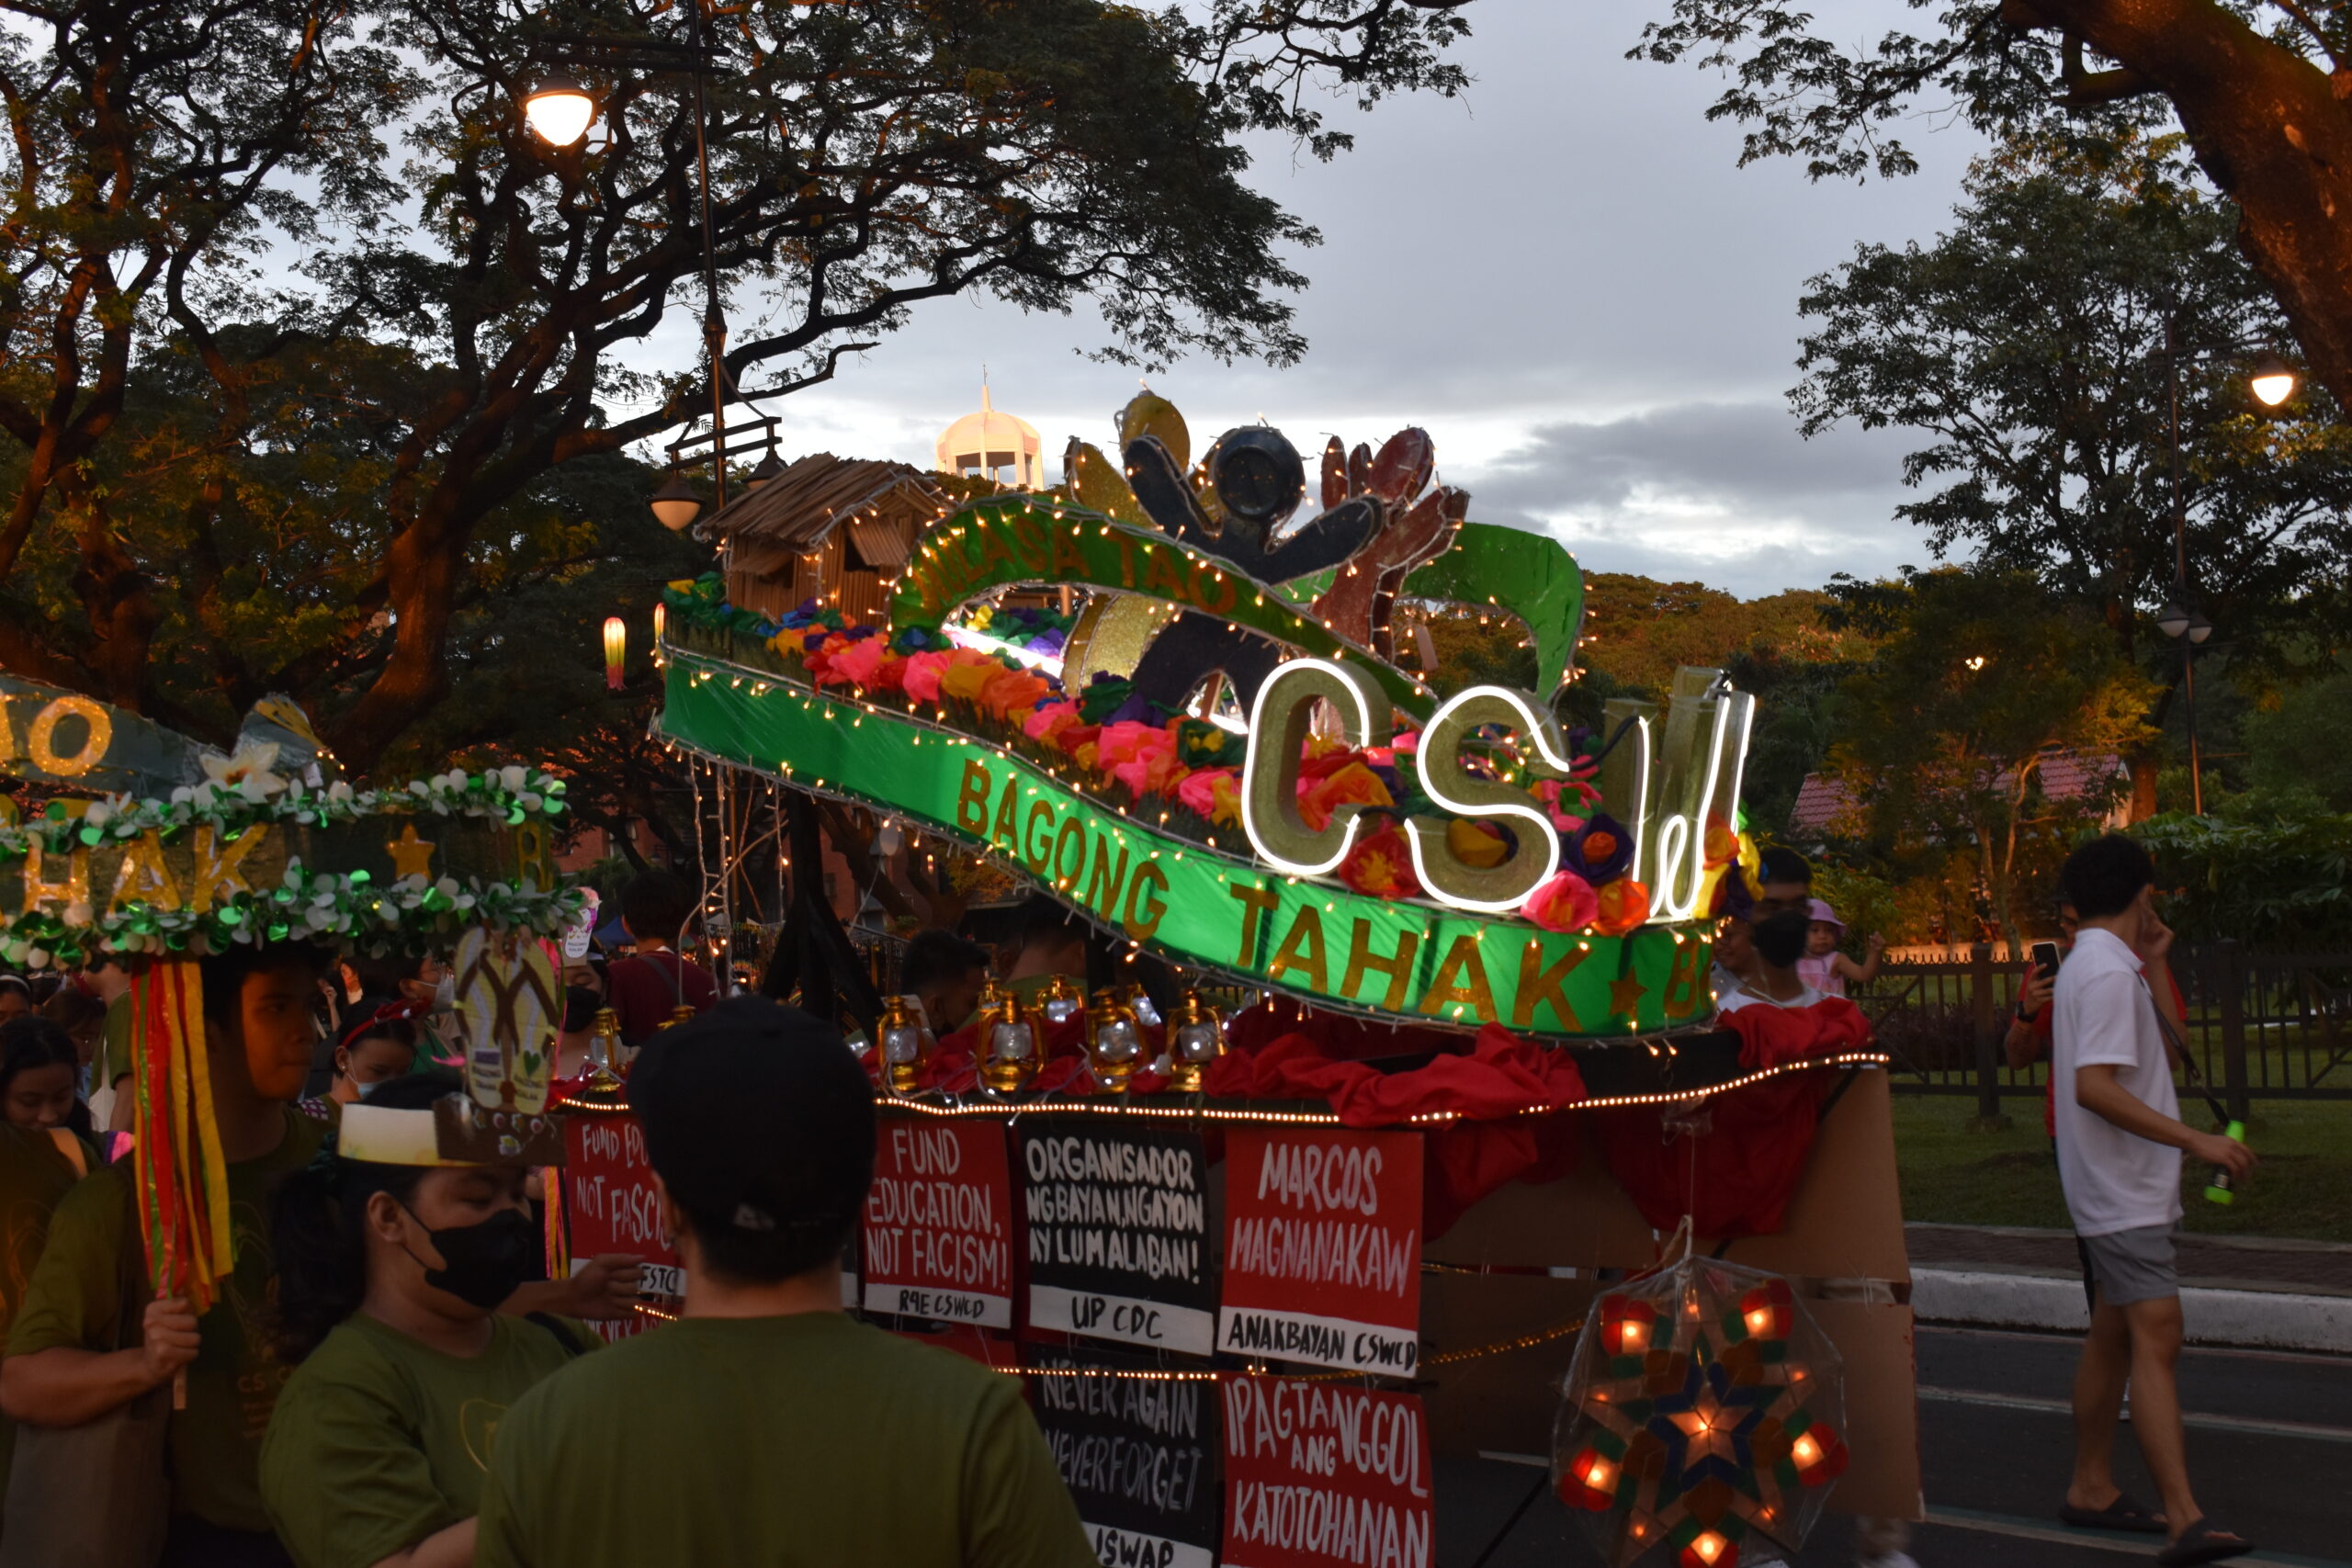 CSWCD wins 3rd Place in the UPD Lantern Parade 2022